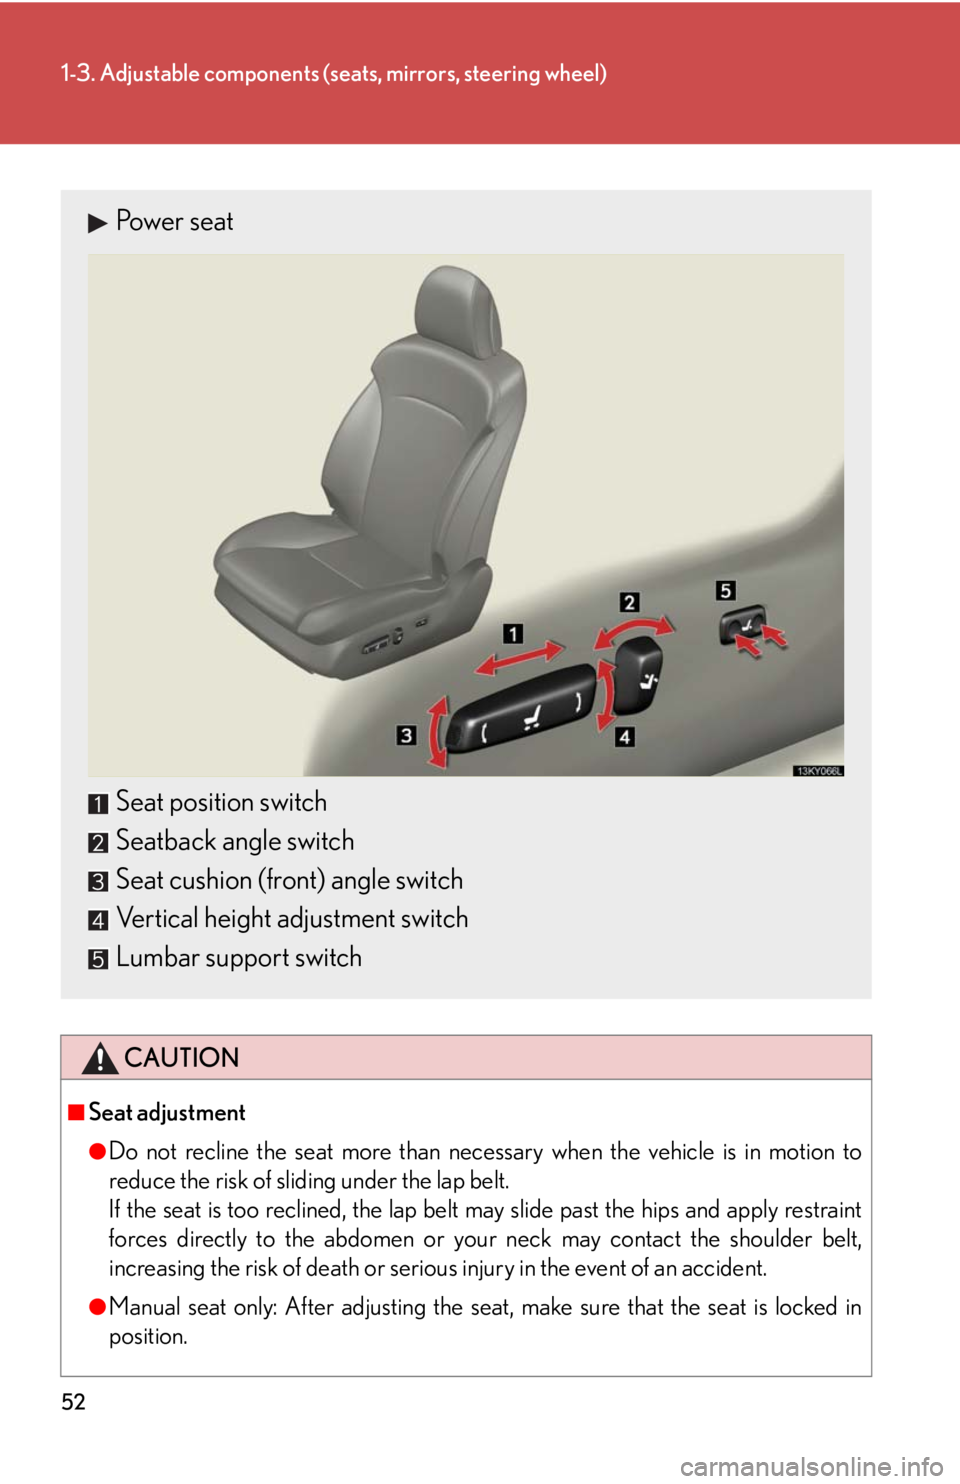 Lexus IS250 2010  Instrument Cluster / LEXUS 2010 IS350 IS250 OWNERS MANUAL (OM53A23U) 52
1-3. Adjustable components (seats, mirrors, steering wheel)
CAUTION
■Seat adjustment
●Do not recline the seat more than necessary when the vehicle is in motion to
reduce the risk of sliding und